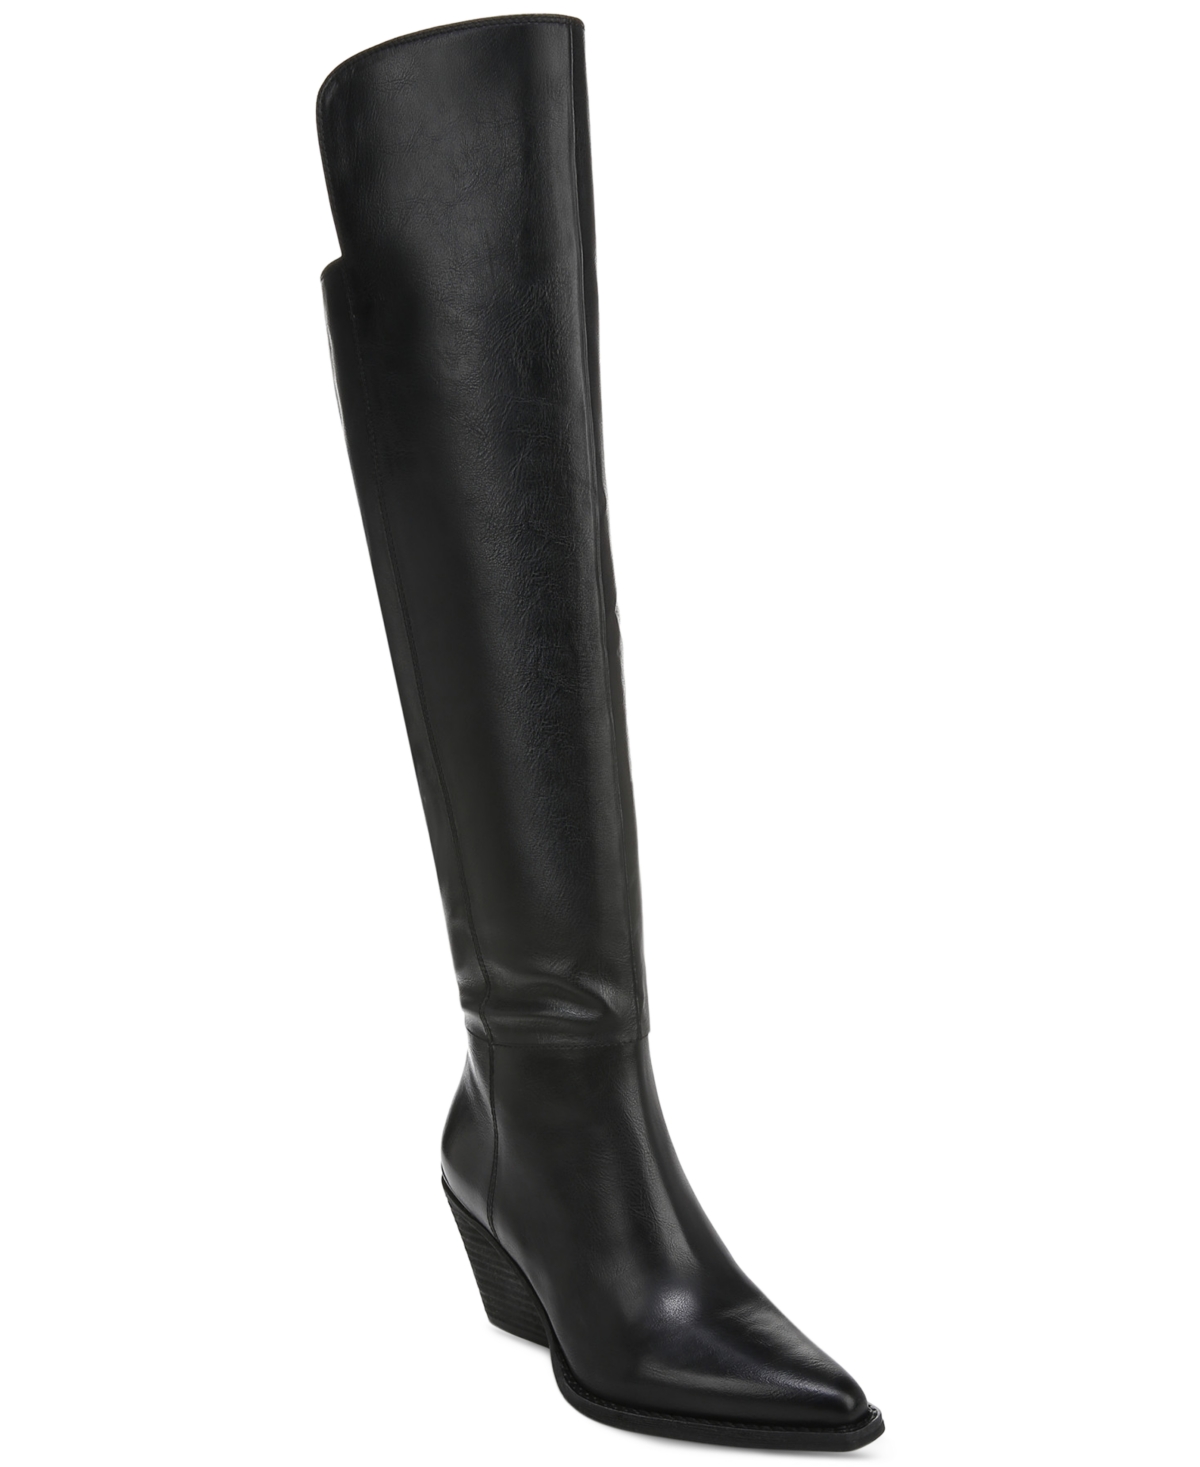 Women's Ronson Over-the-Knee Cowboy Boots - Black